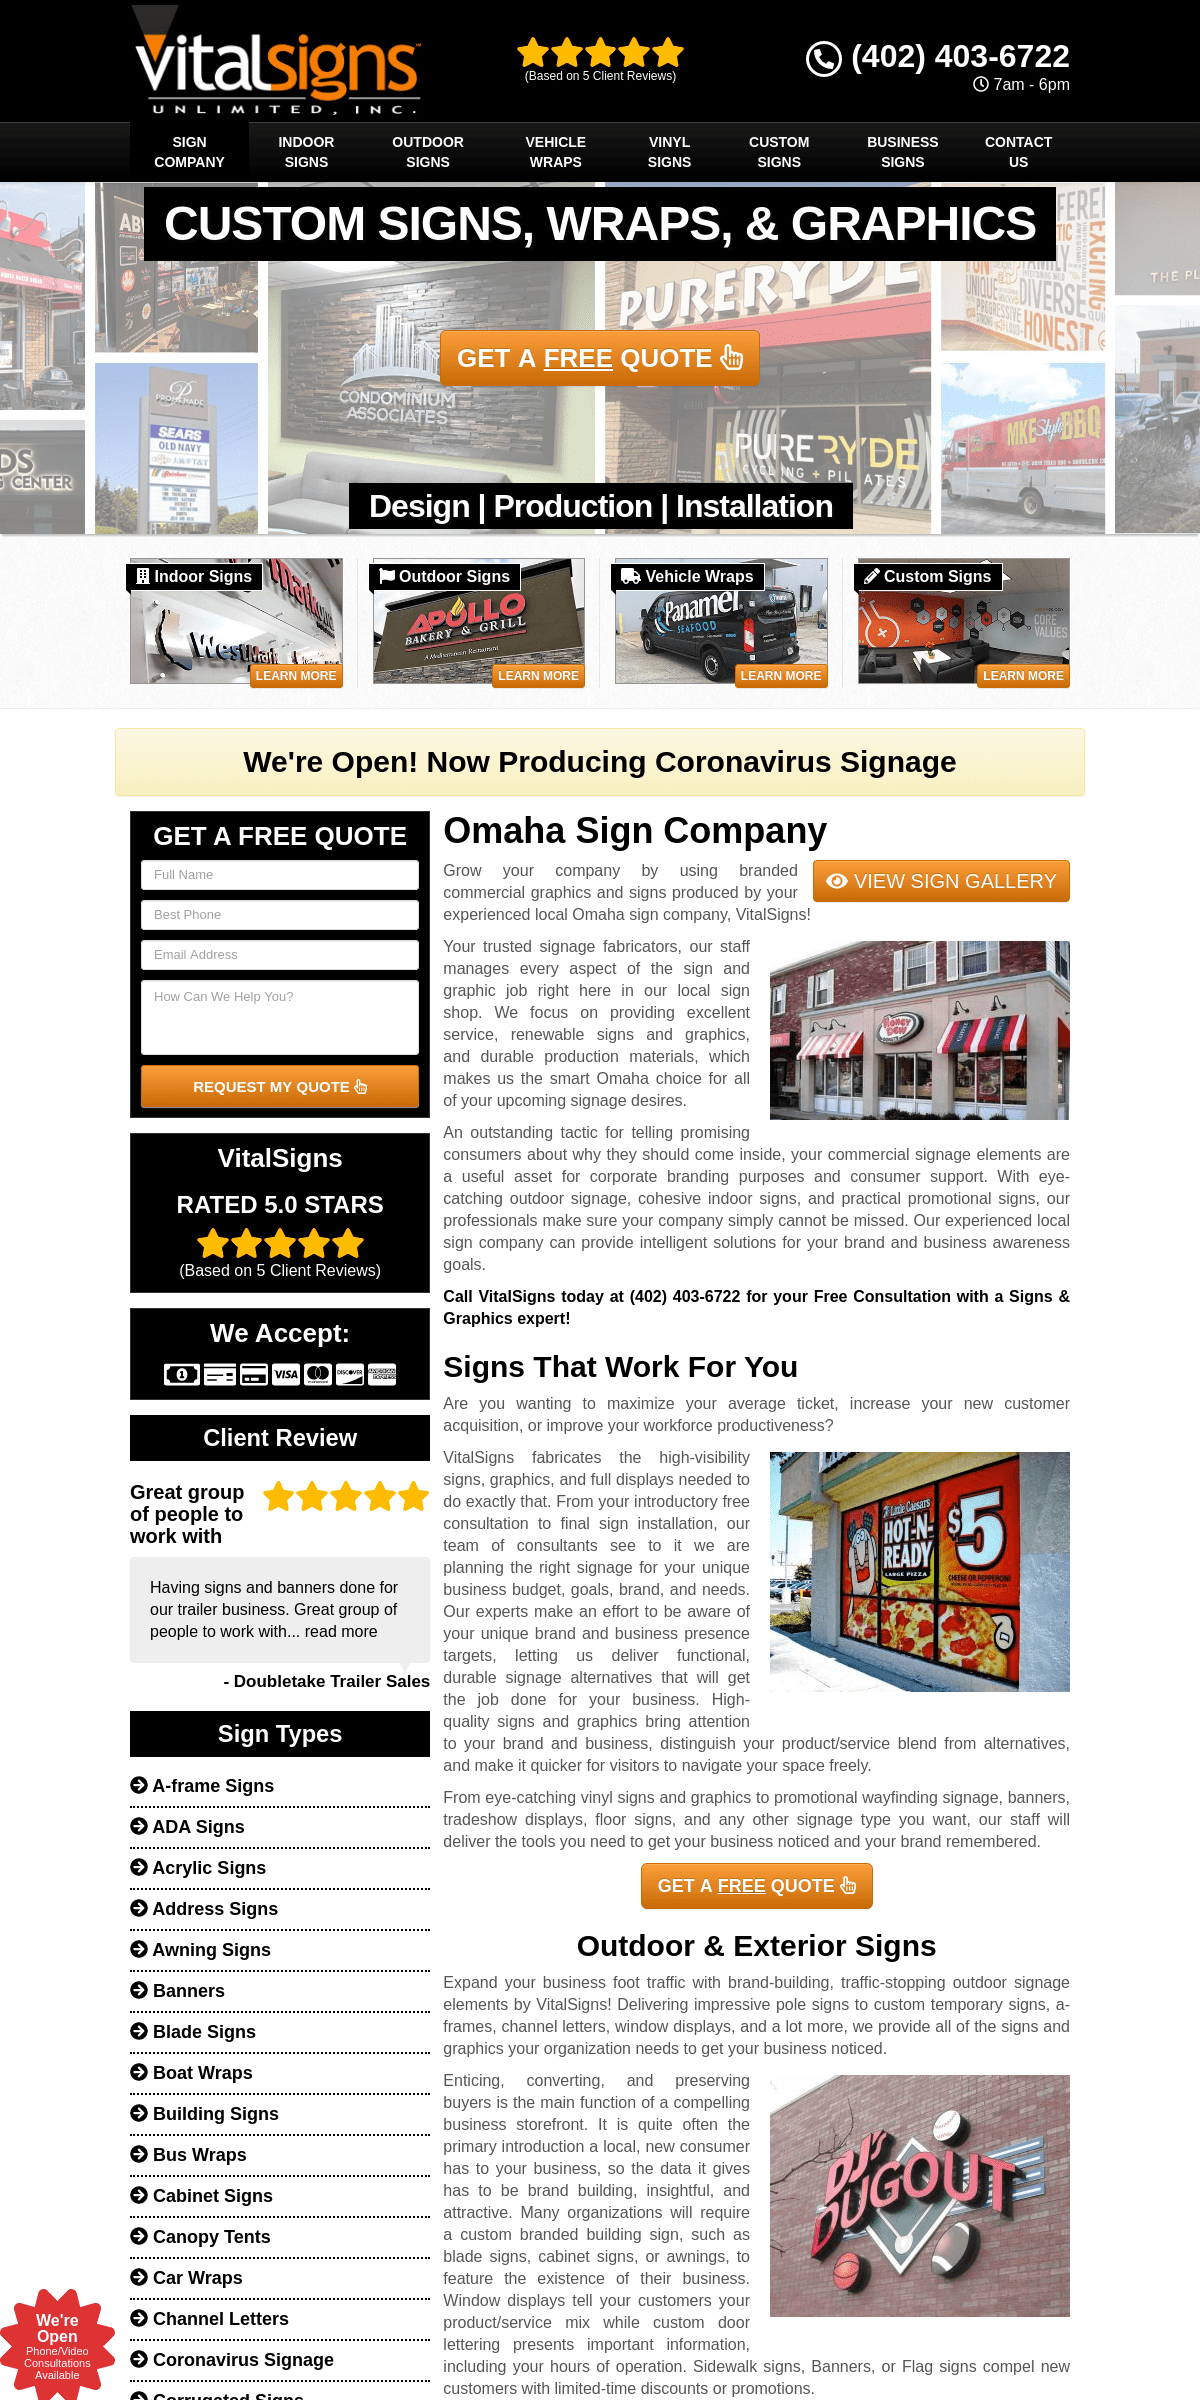 A complete backup of omahasigncompany.net